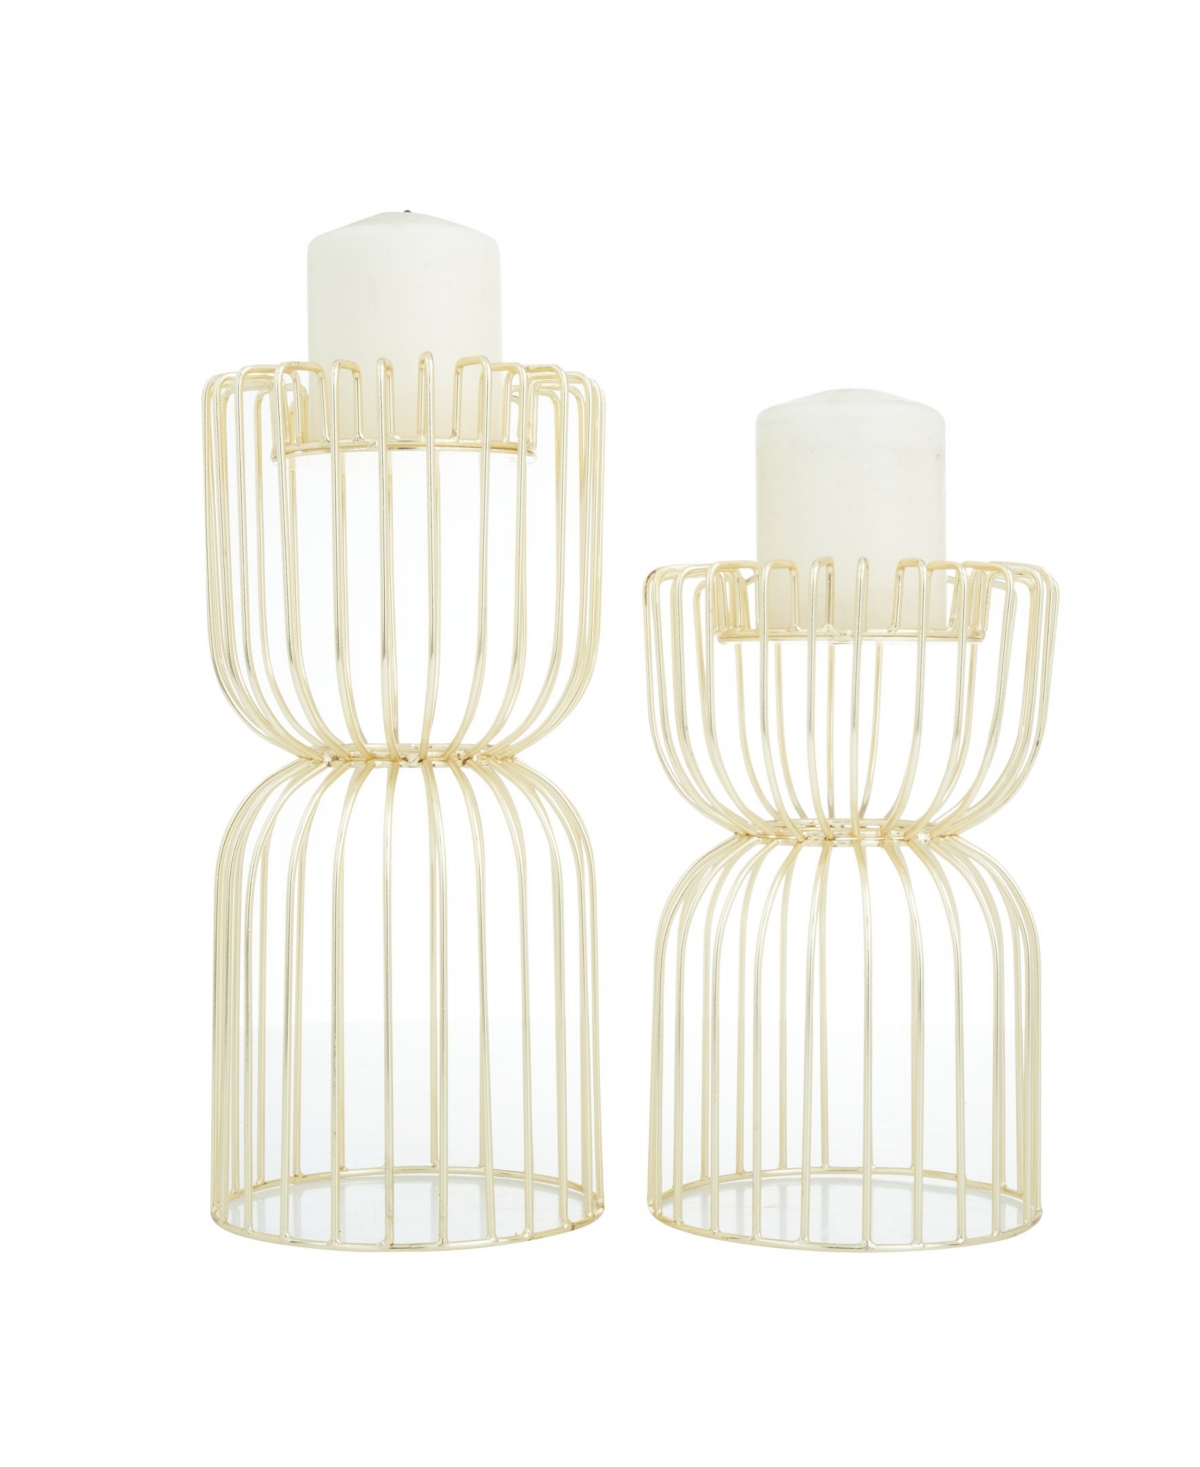 CosmoLiving by Cosmopolitan Glam Candle Holder, Set of 2